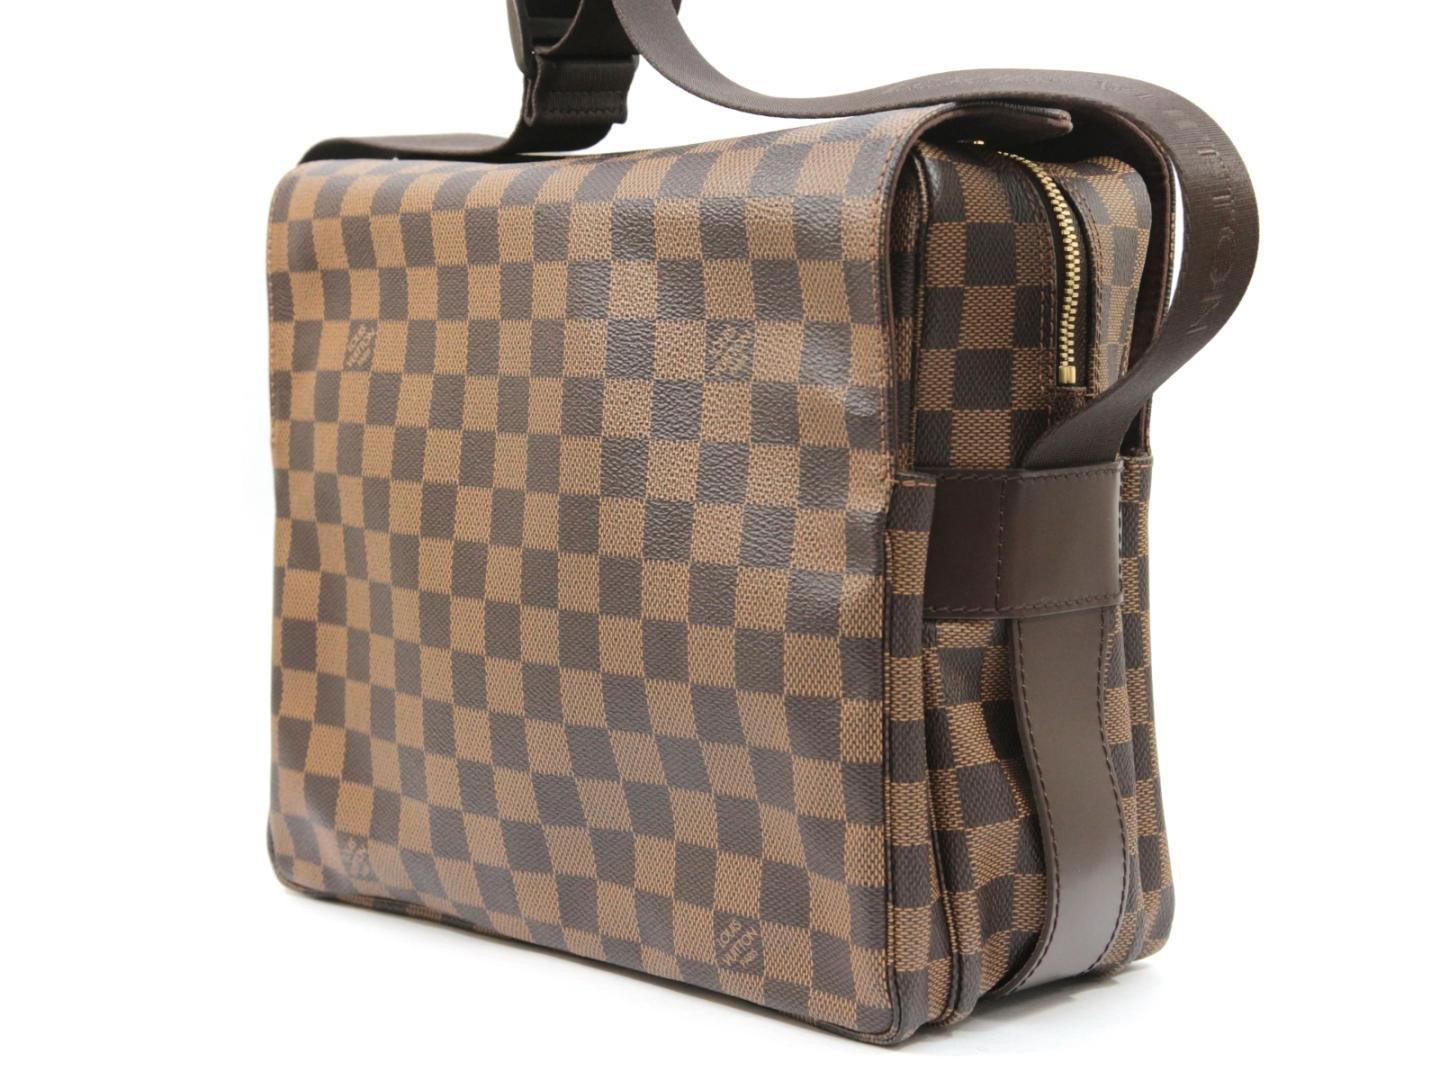 Brown Louis Vuitton Cross Body Bags - Up to 70% off at Tradesy